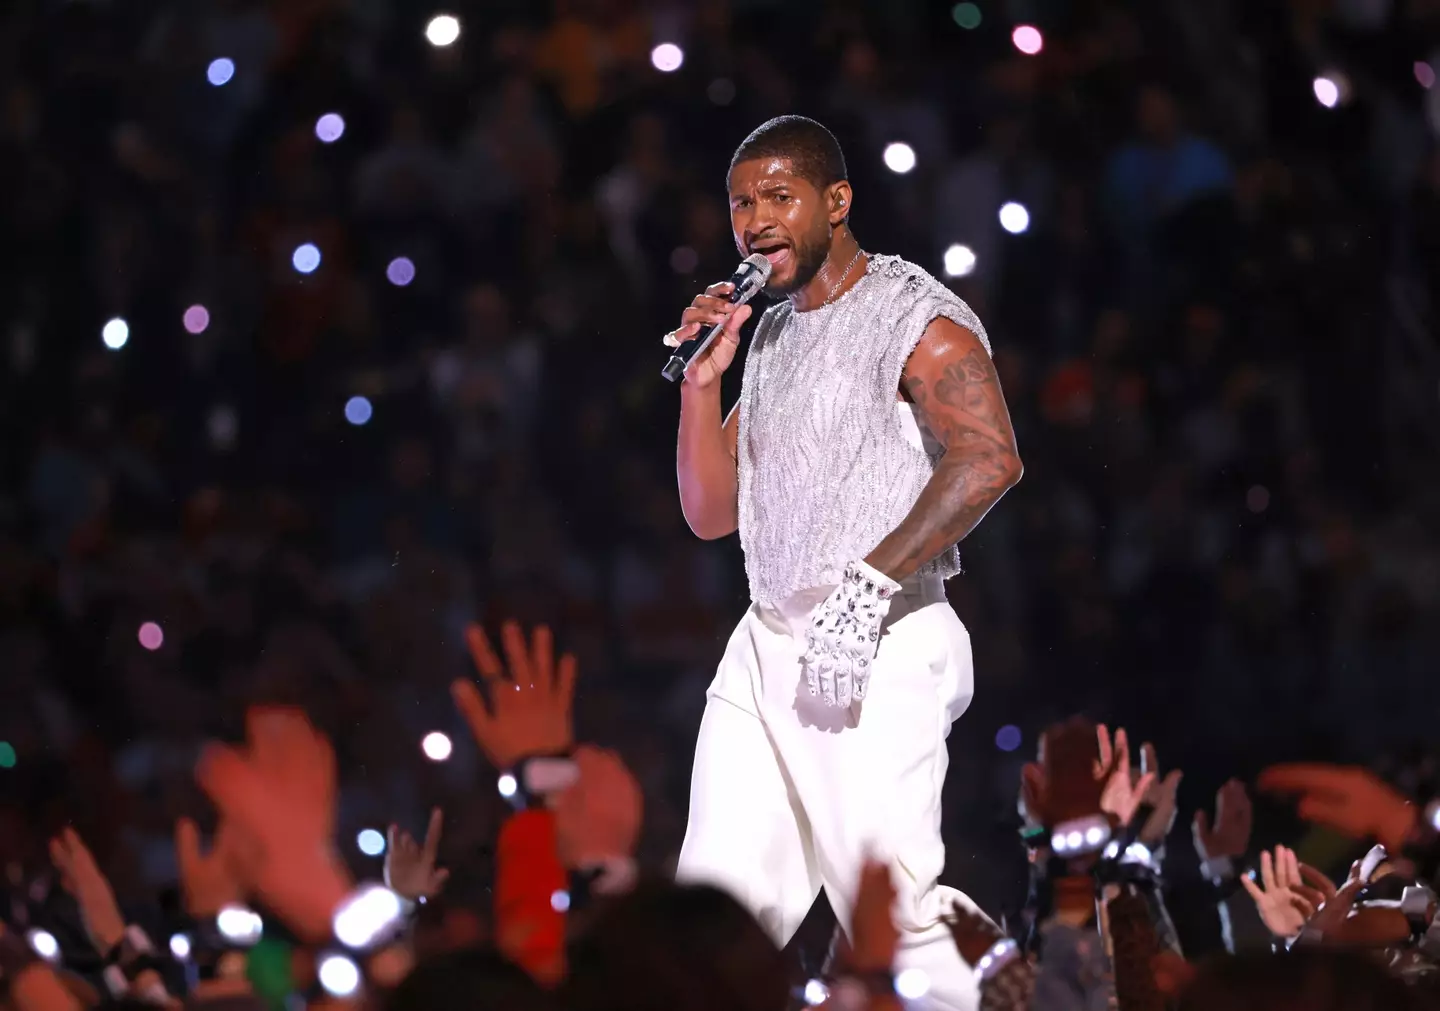 Usher took over this year's Super Bowl halftime show.